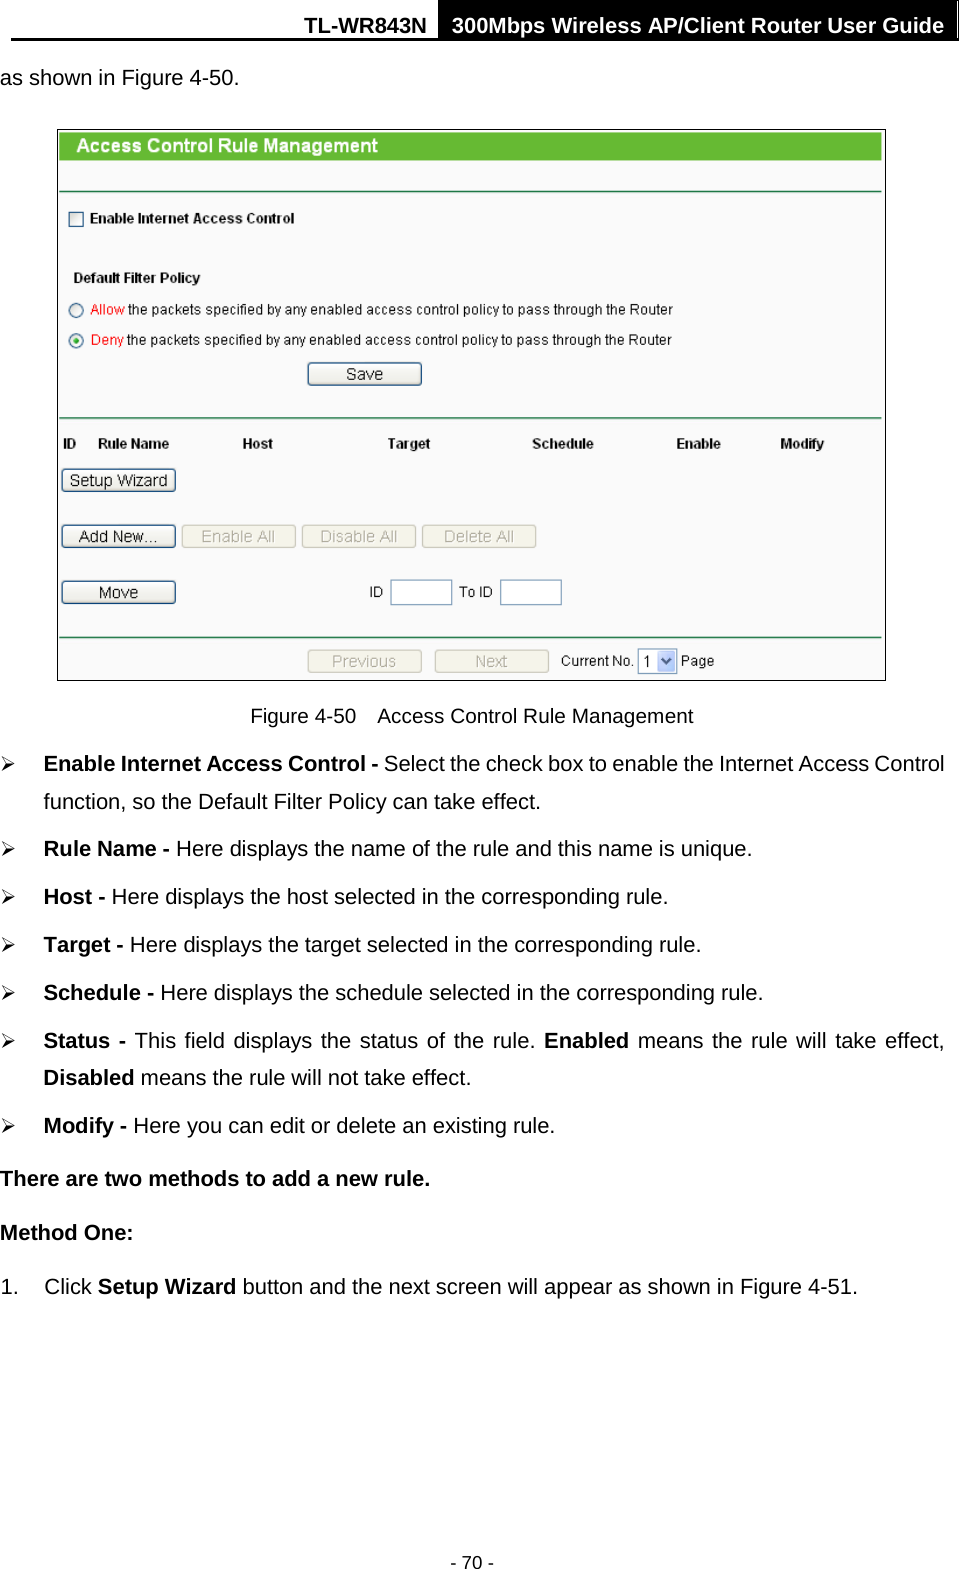 TL-WR843N 300Mbps Wireless AP/Client Router User Guide - 70 - as shown in Figure 4-50. Figure 4-50  Access Control Rule Management Enable Internet Access Control - Select the check box to enable the Internet Access Controlfunction, so the Default Filter Policy can take effect.Rule Name - Here displays the name of the rule and this name is unique.Host - Here displays the host selected in the corresponding rule.Target - Here displays the target selected in the corresponding rule.Schedule - Here displays the schedule selected in the corresponding rule.Status - This field displays the status of the rule. Enabled means the rule will take effect,Disabled means the rule will not take effect.Modify - Here you can edit or delete an existing rule.There are two methods to add a new rule. Method One: 1. Click Setup Wizard button and the next screen will appear as shown in Figure 4-51.